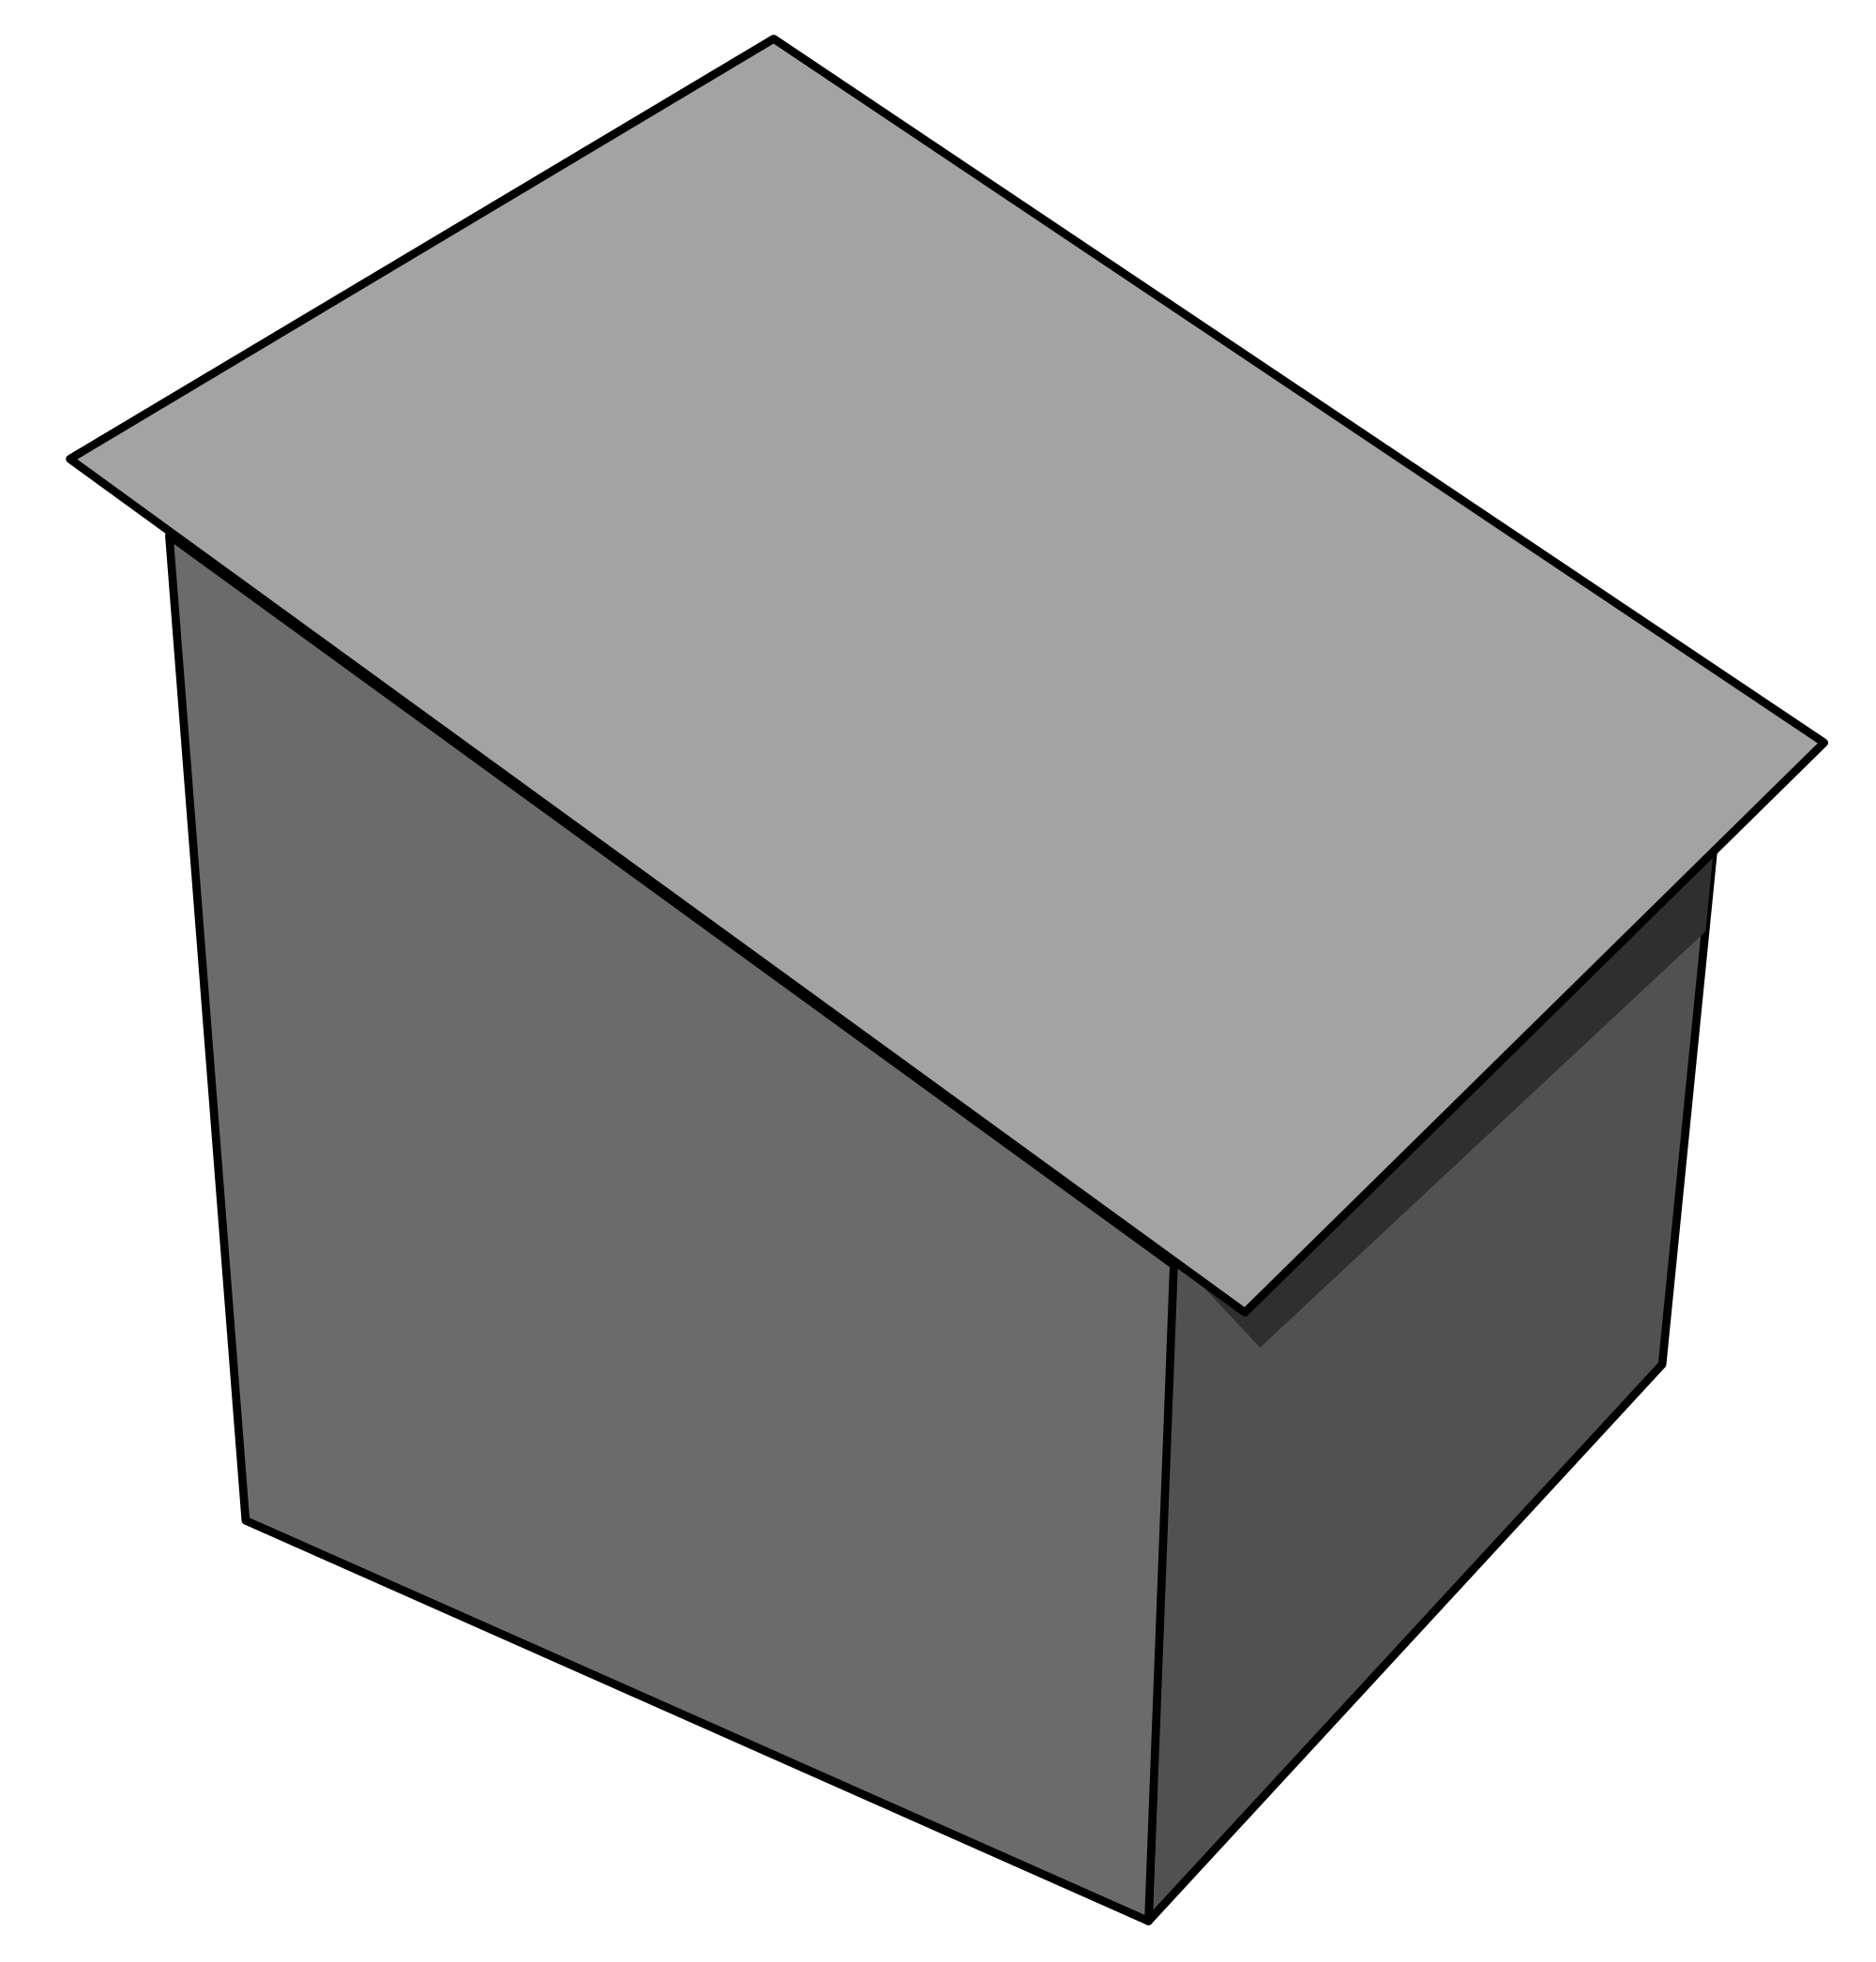 Roof svg #13, Download drawings